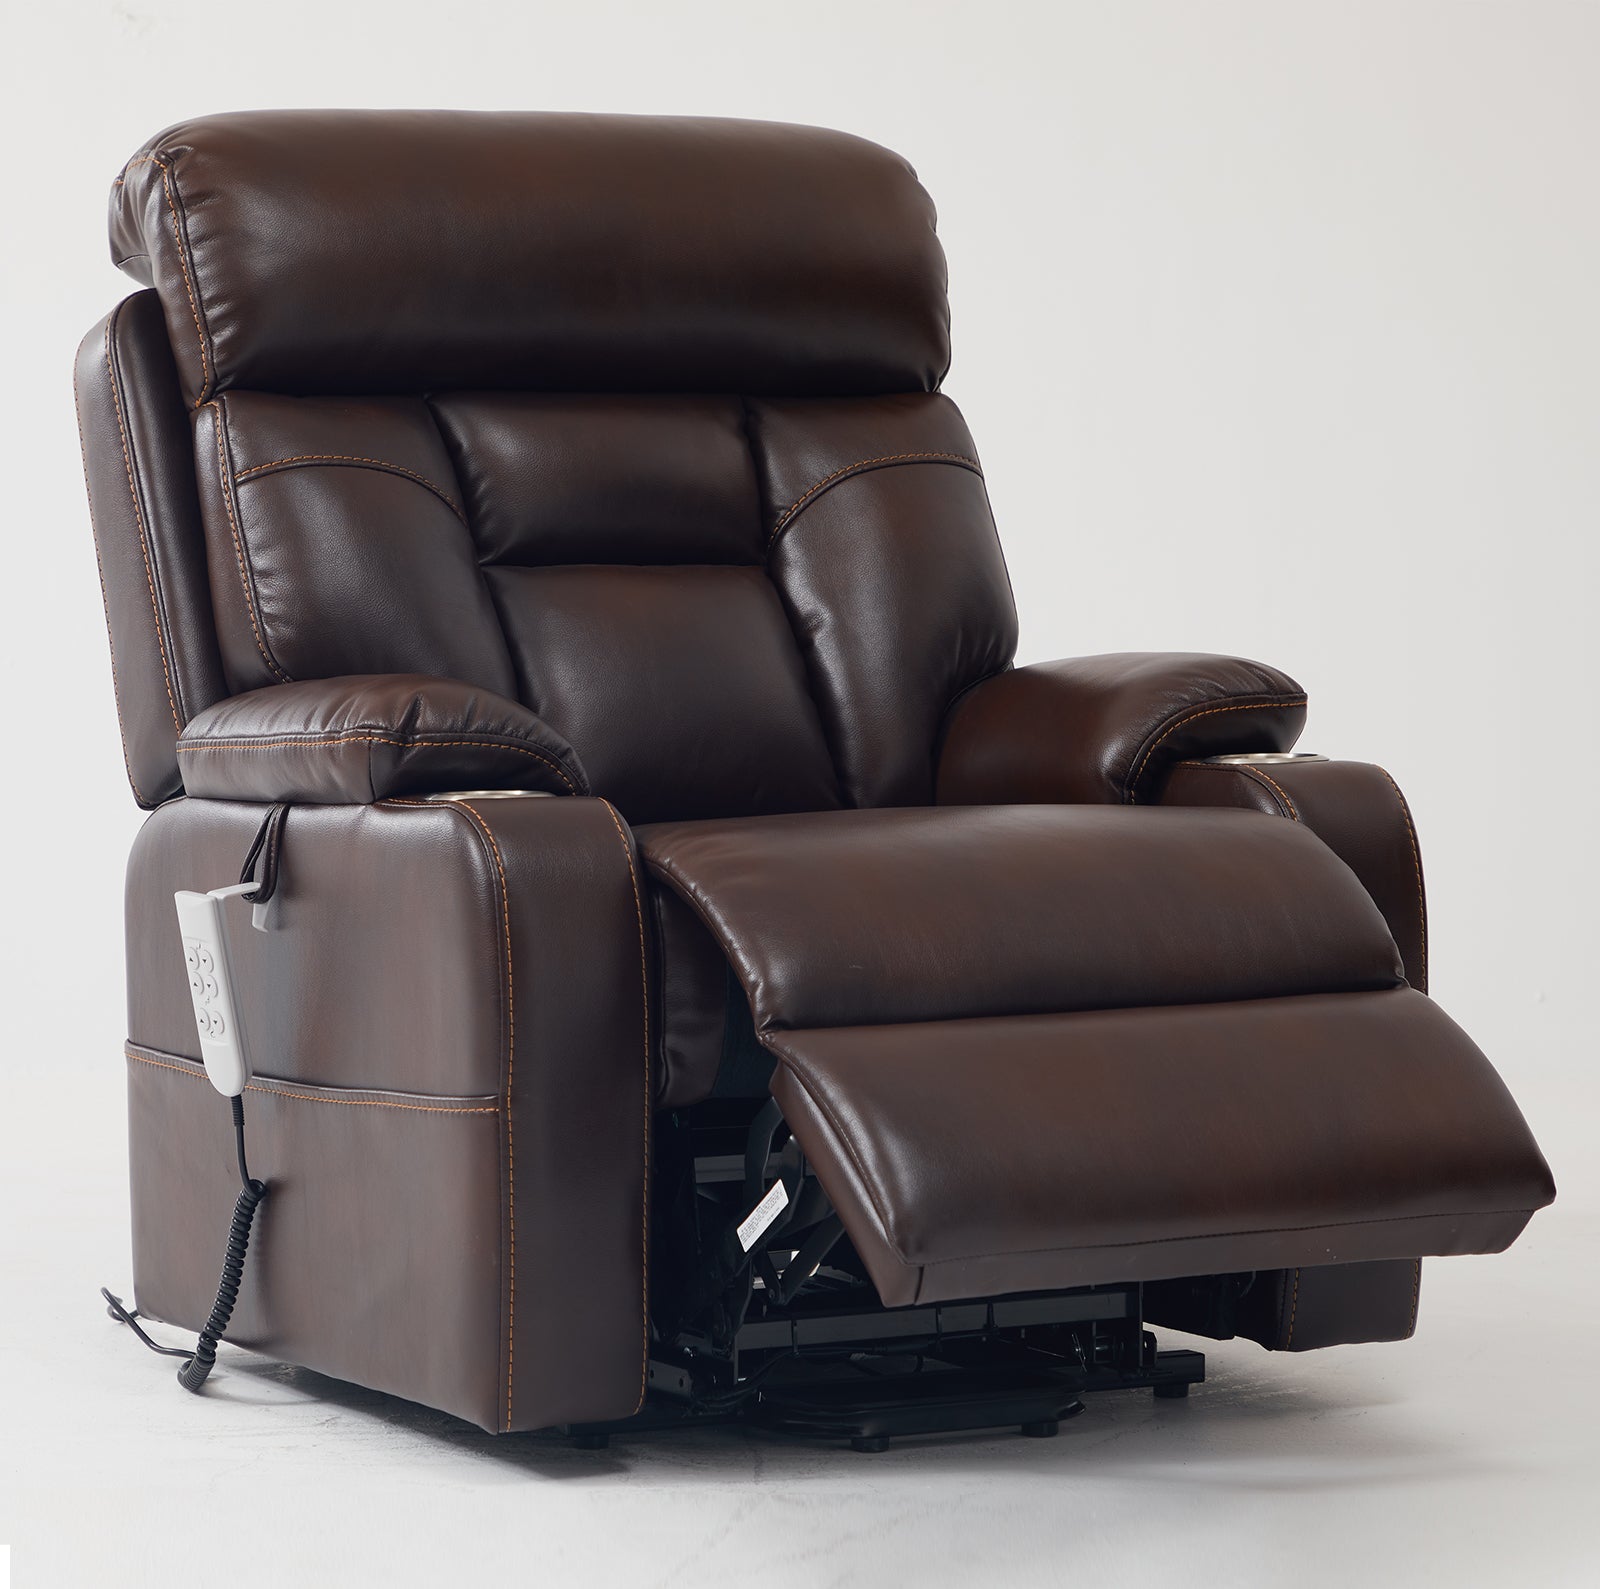 Three Motor Lift Recliner for Elderly With Lumbar Support – Relaxing  Recliners